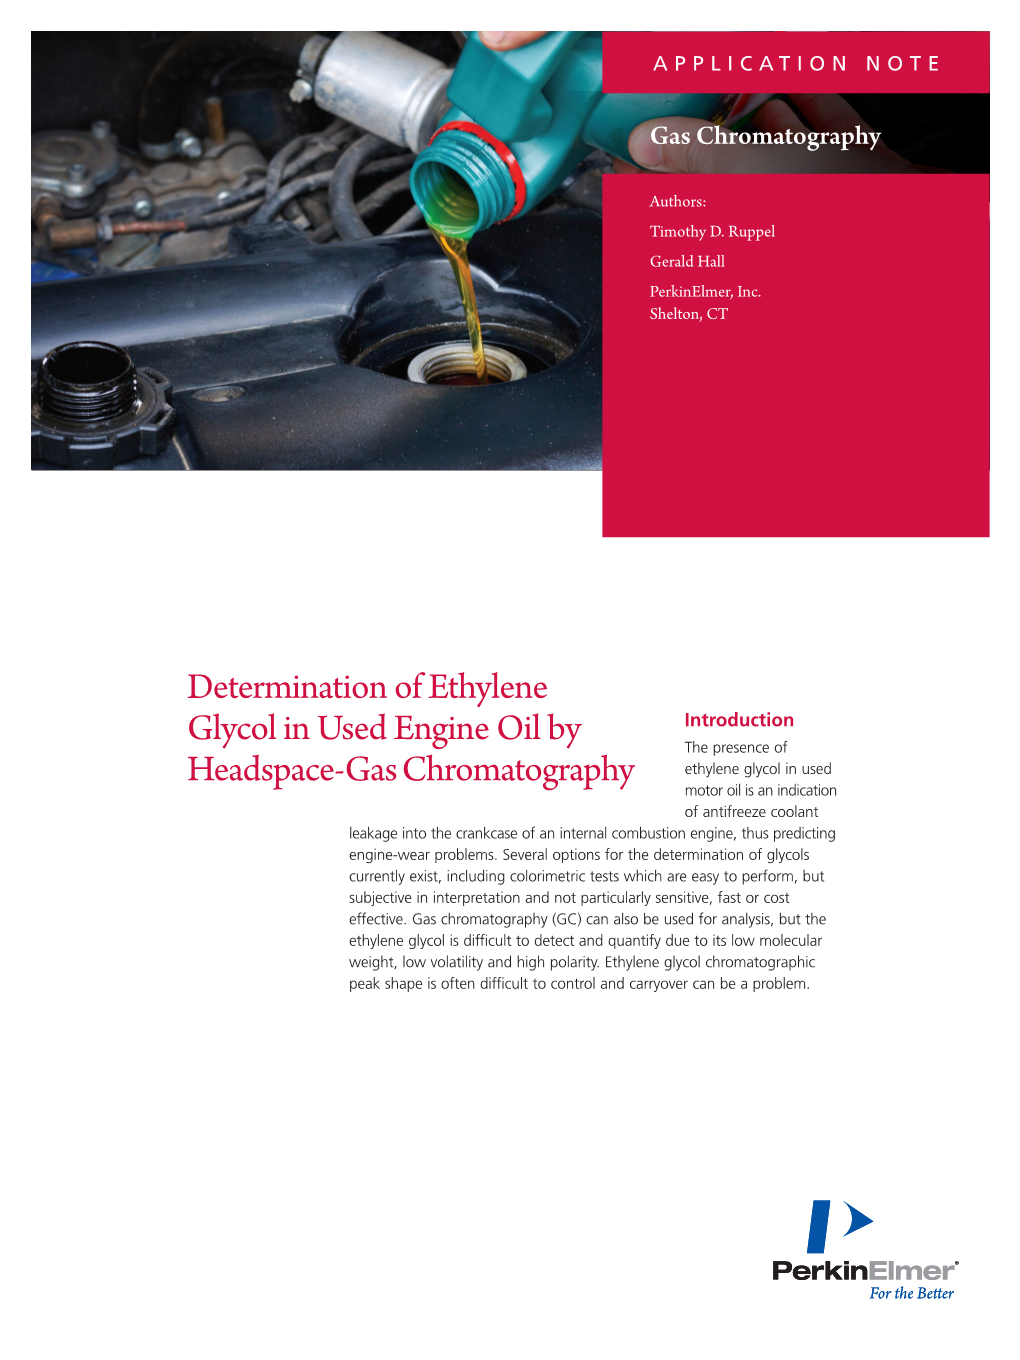 Determination of Ethylene Glycol in Used Engine Oil by Headspace